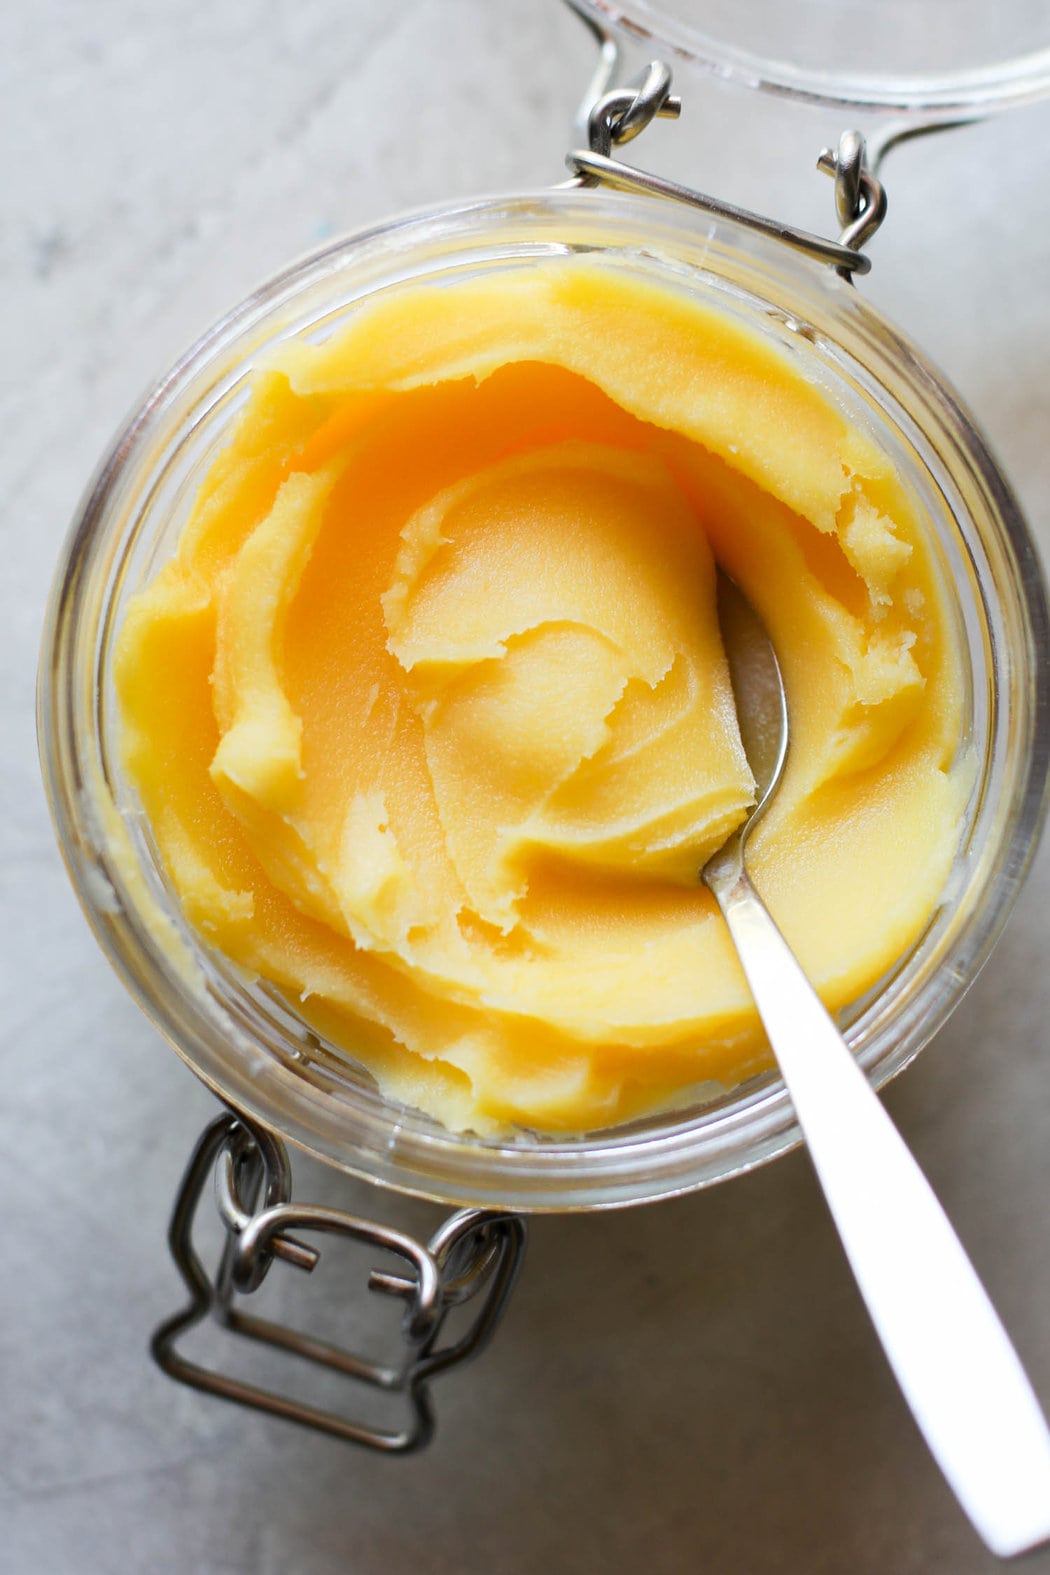 https://therealfooddietitians.com/wp-content/uploads/2016/09/Ghee-photos-2-of-14.jpg